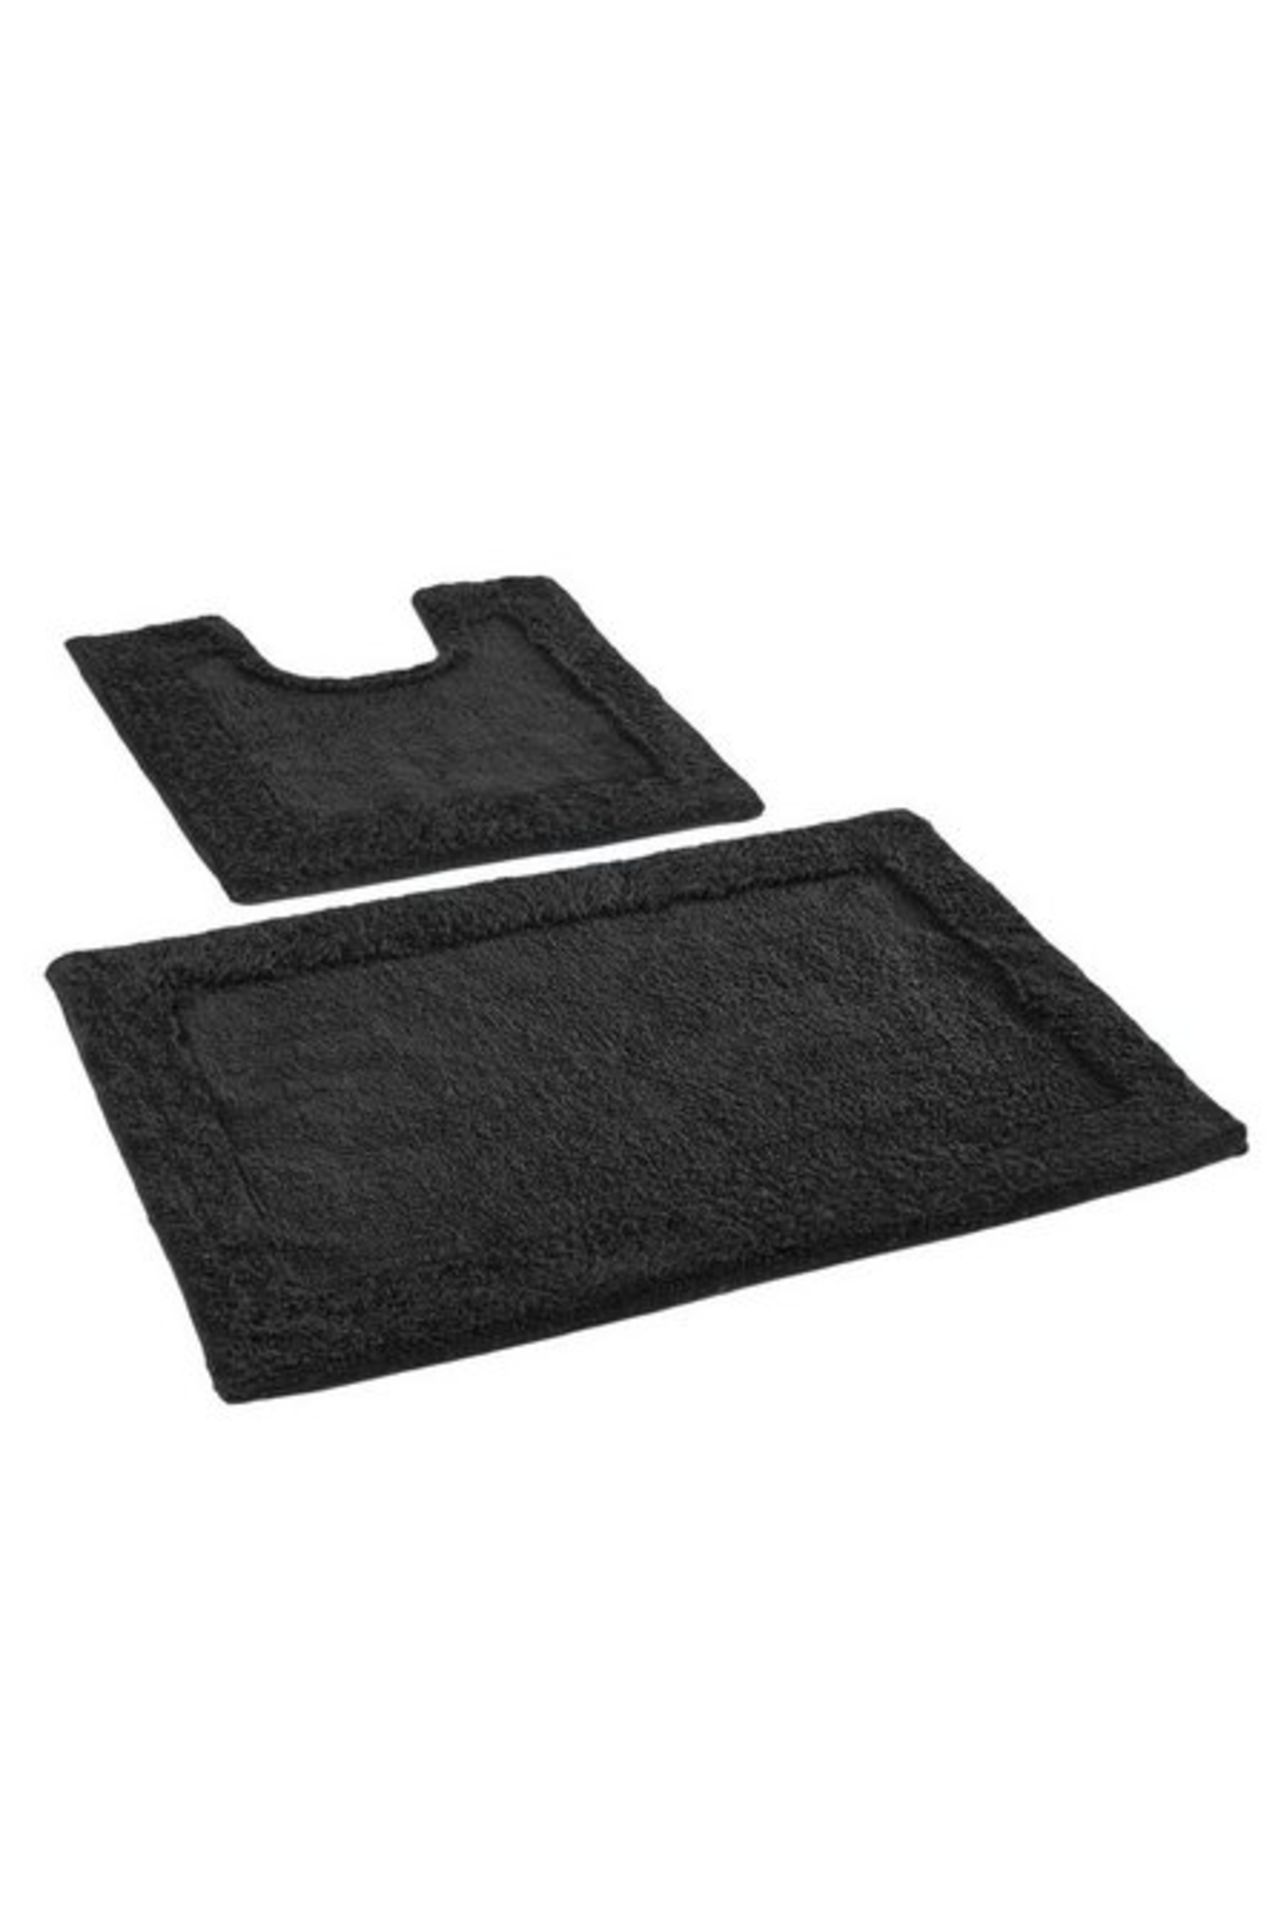 1 BAGGED KINGSLEY HOME MAT SET IN BLACK (PUBLIC VIEWING AVAILABLE)